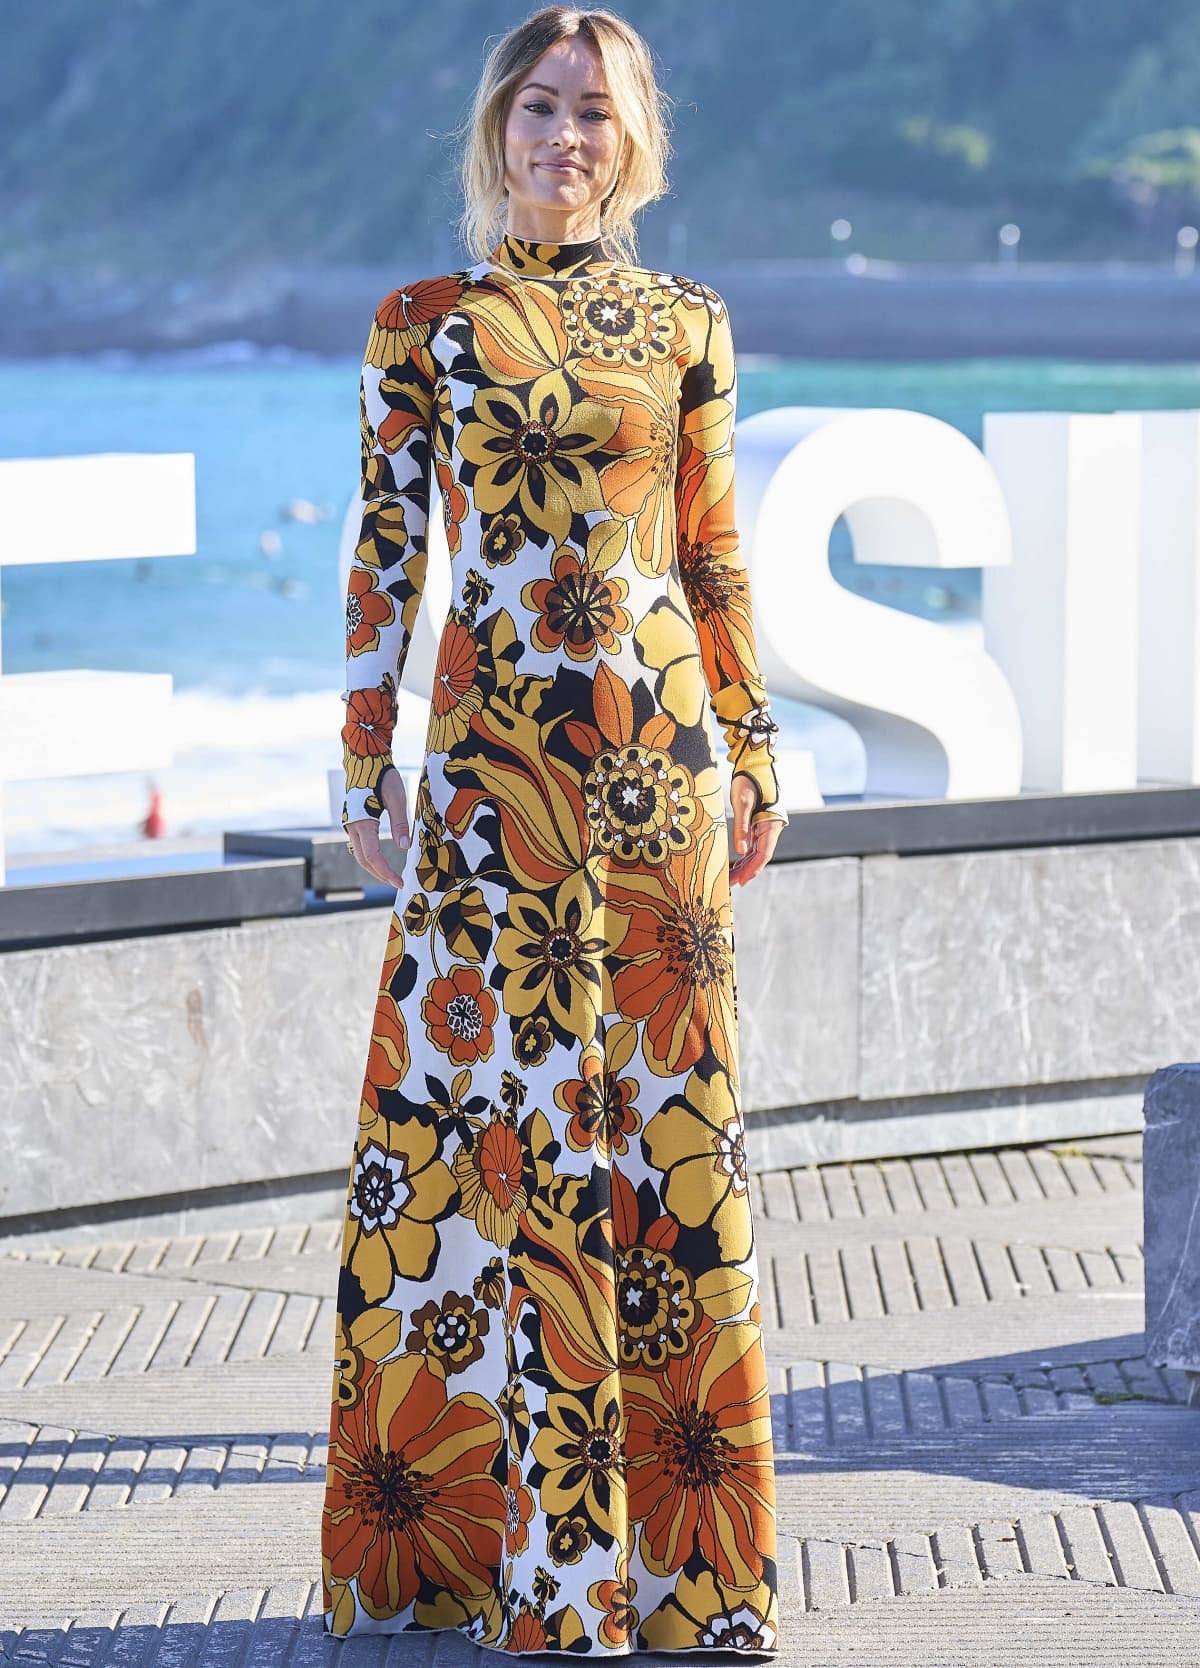 Olivia Wilde wearing a long-sleeved floral dress from Kwaidan Editions at the Don’t Worry Darling photocall